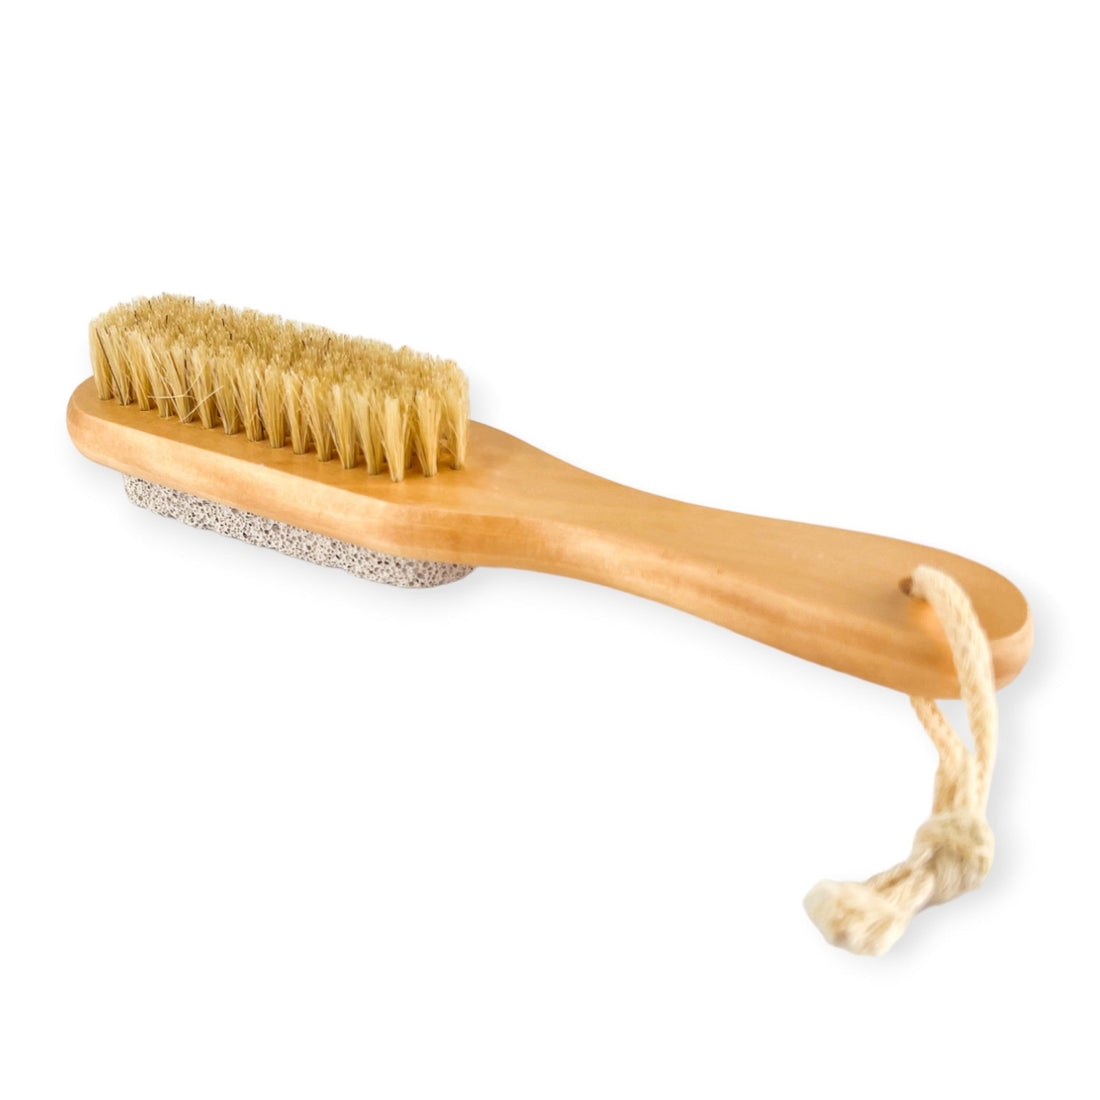 Wooden Pumice Brush with Handle - Old Town Soap Co.